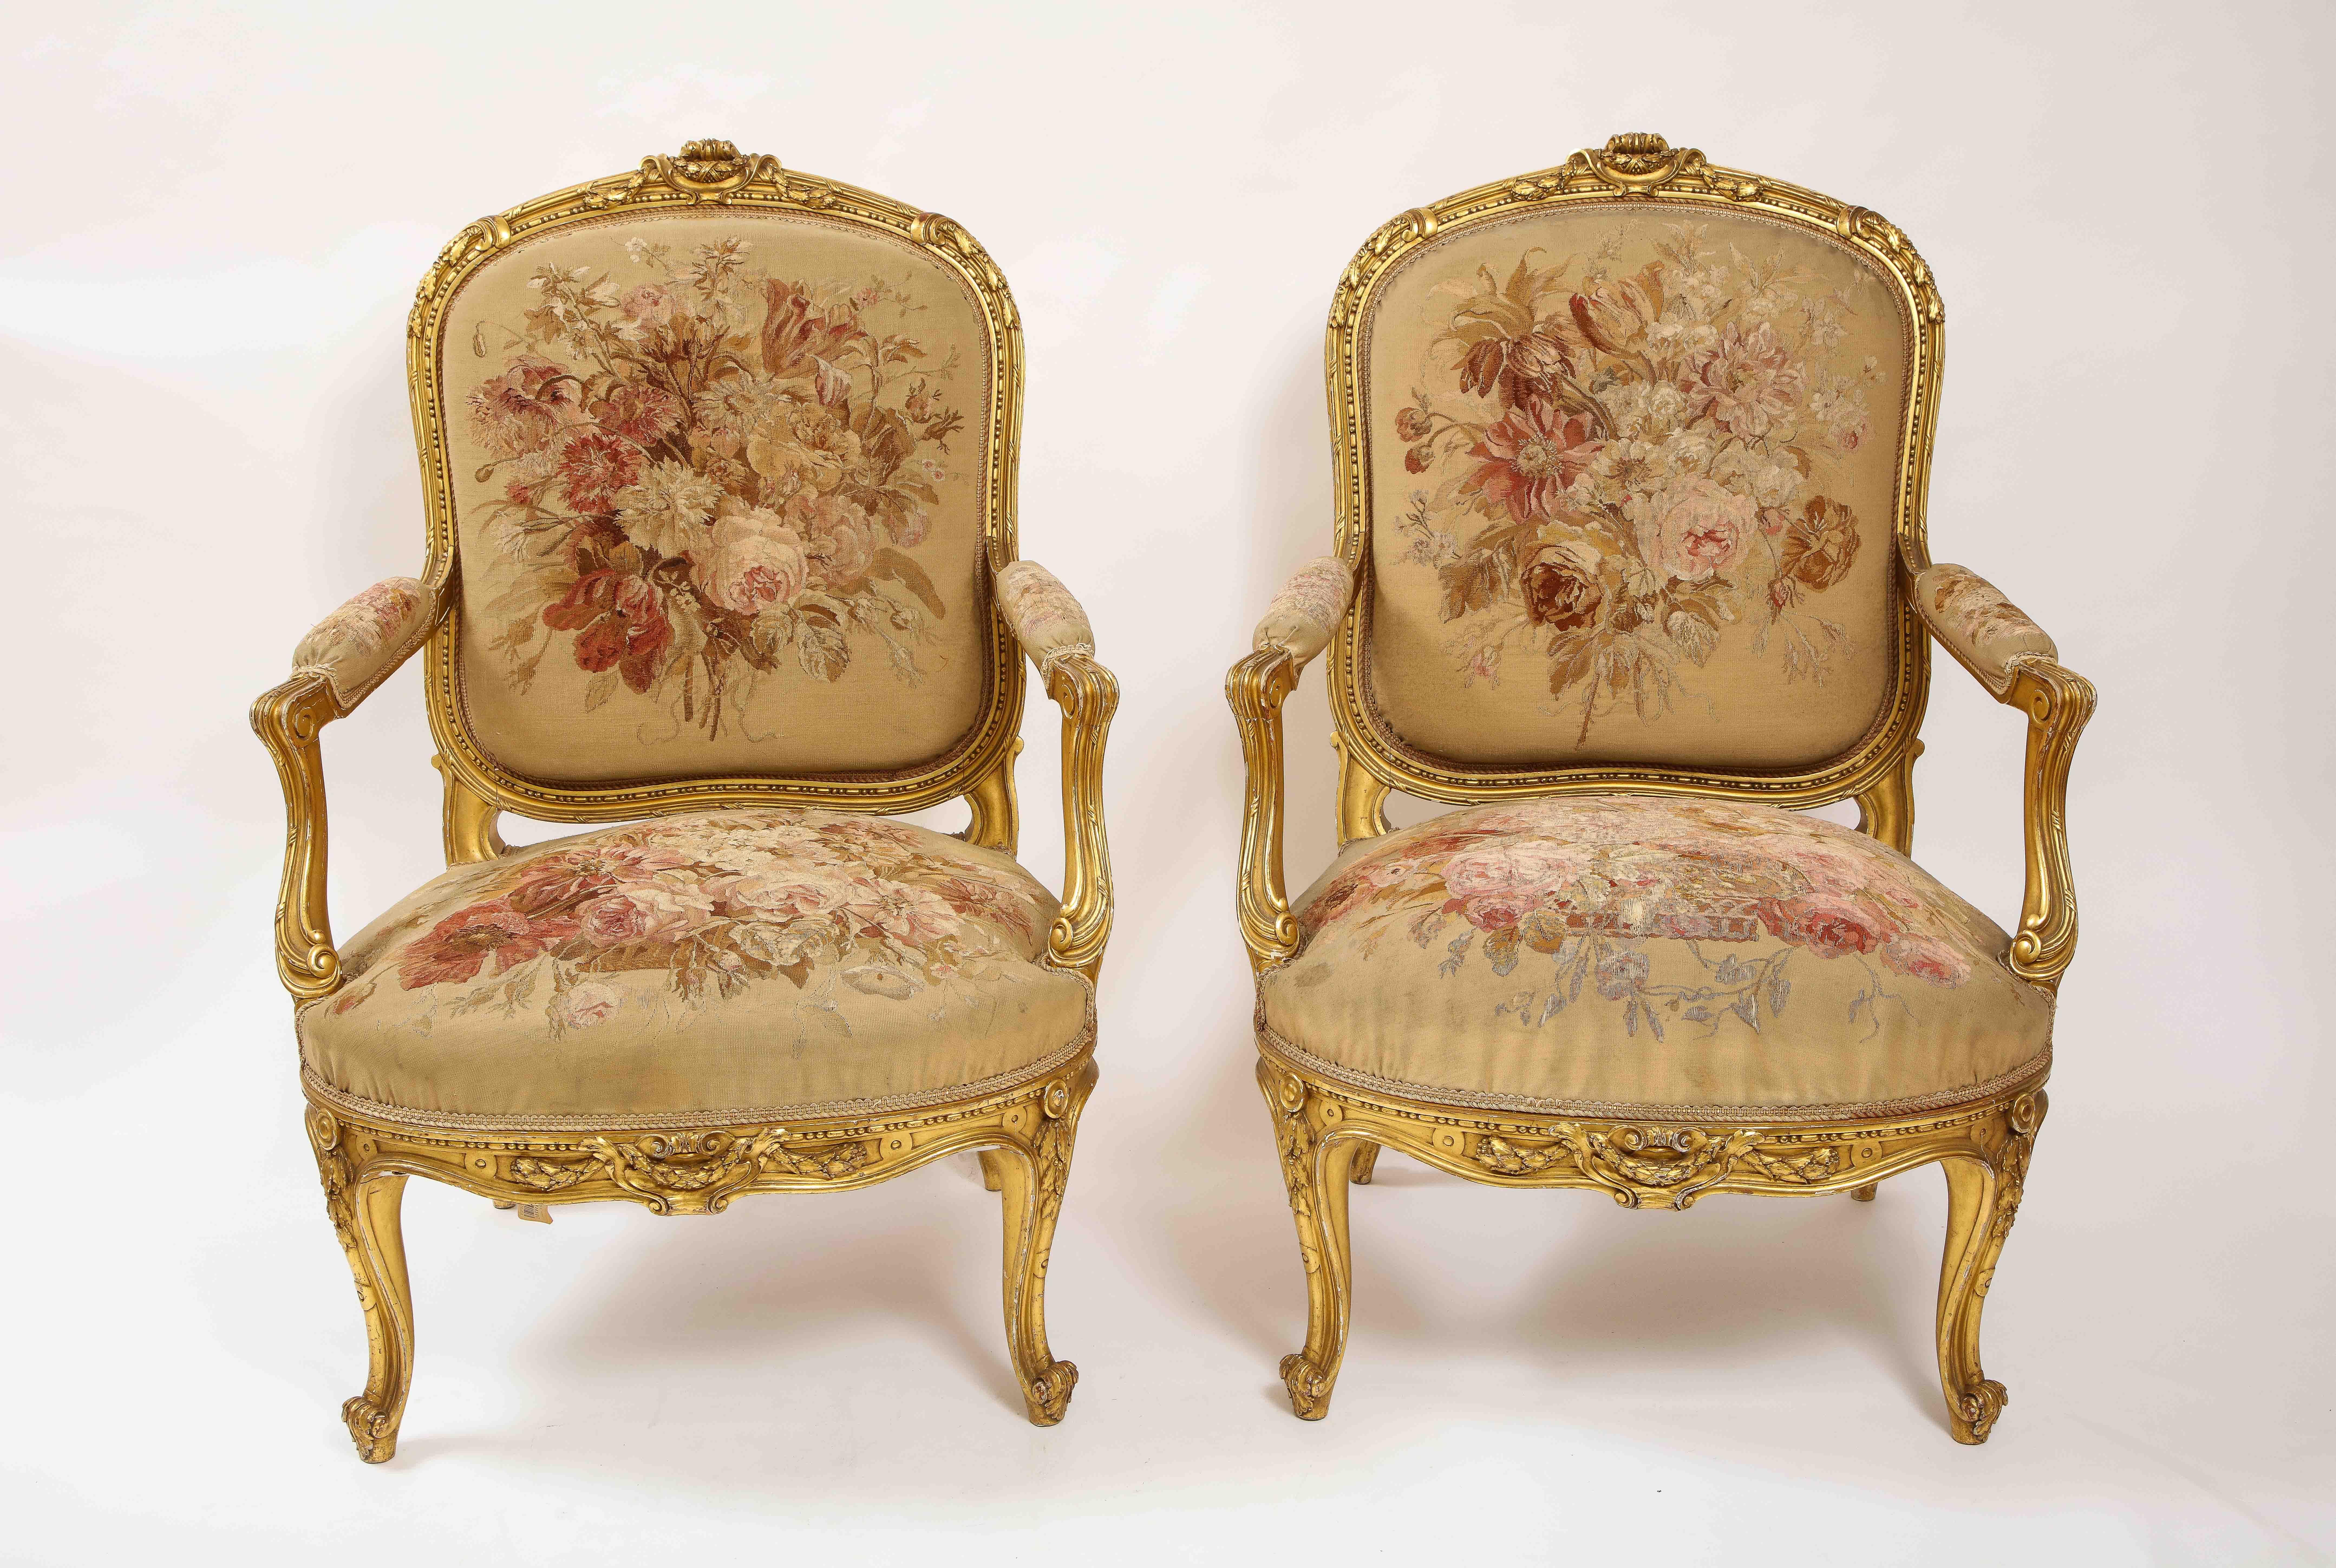 An Antique French 19th Century Louis XVI Style Five Piece Royal Giltwood and Aubusson Complete Suite with Canapé and four side-chairs, Attributed to Linke. This suite comprises of a canapé and four side-chairs. Each piece is made up of